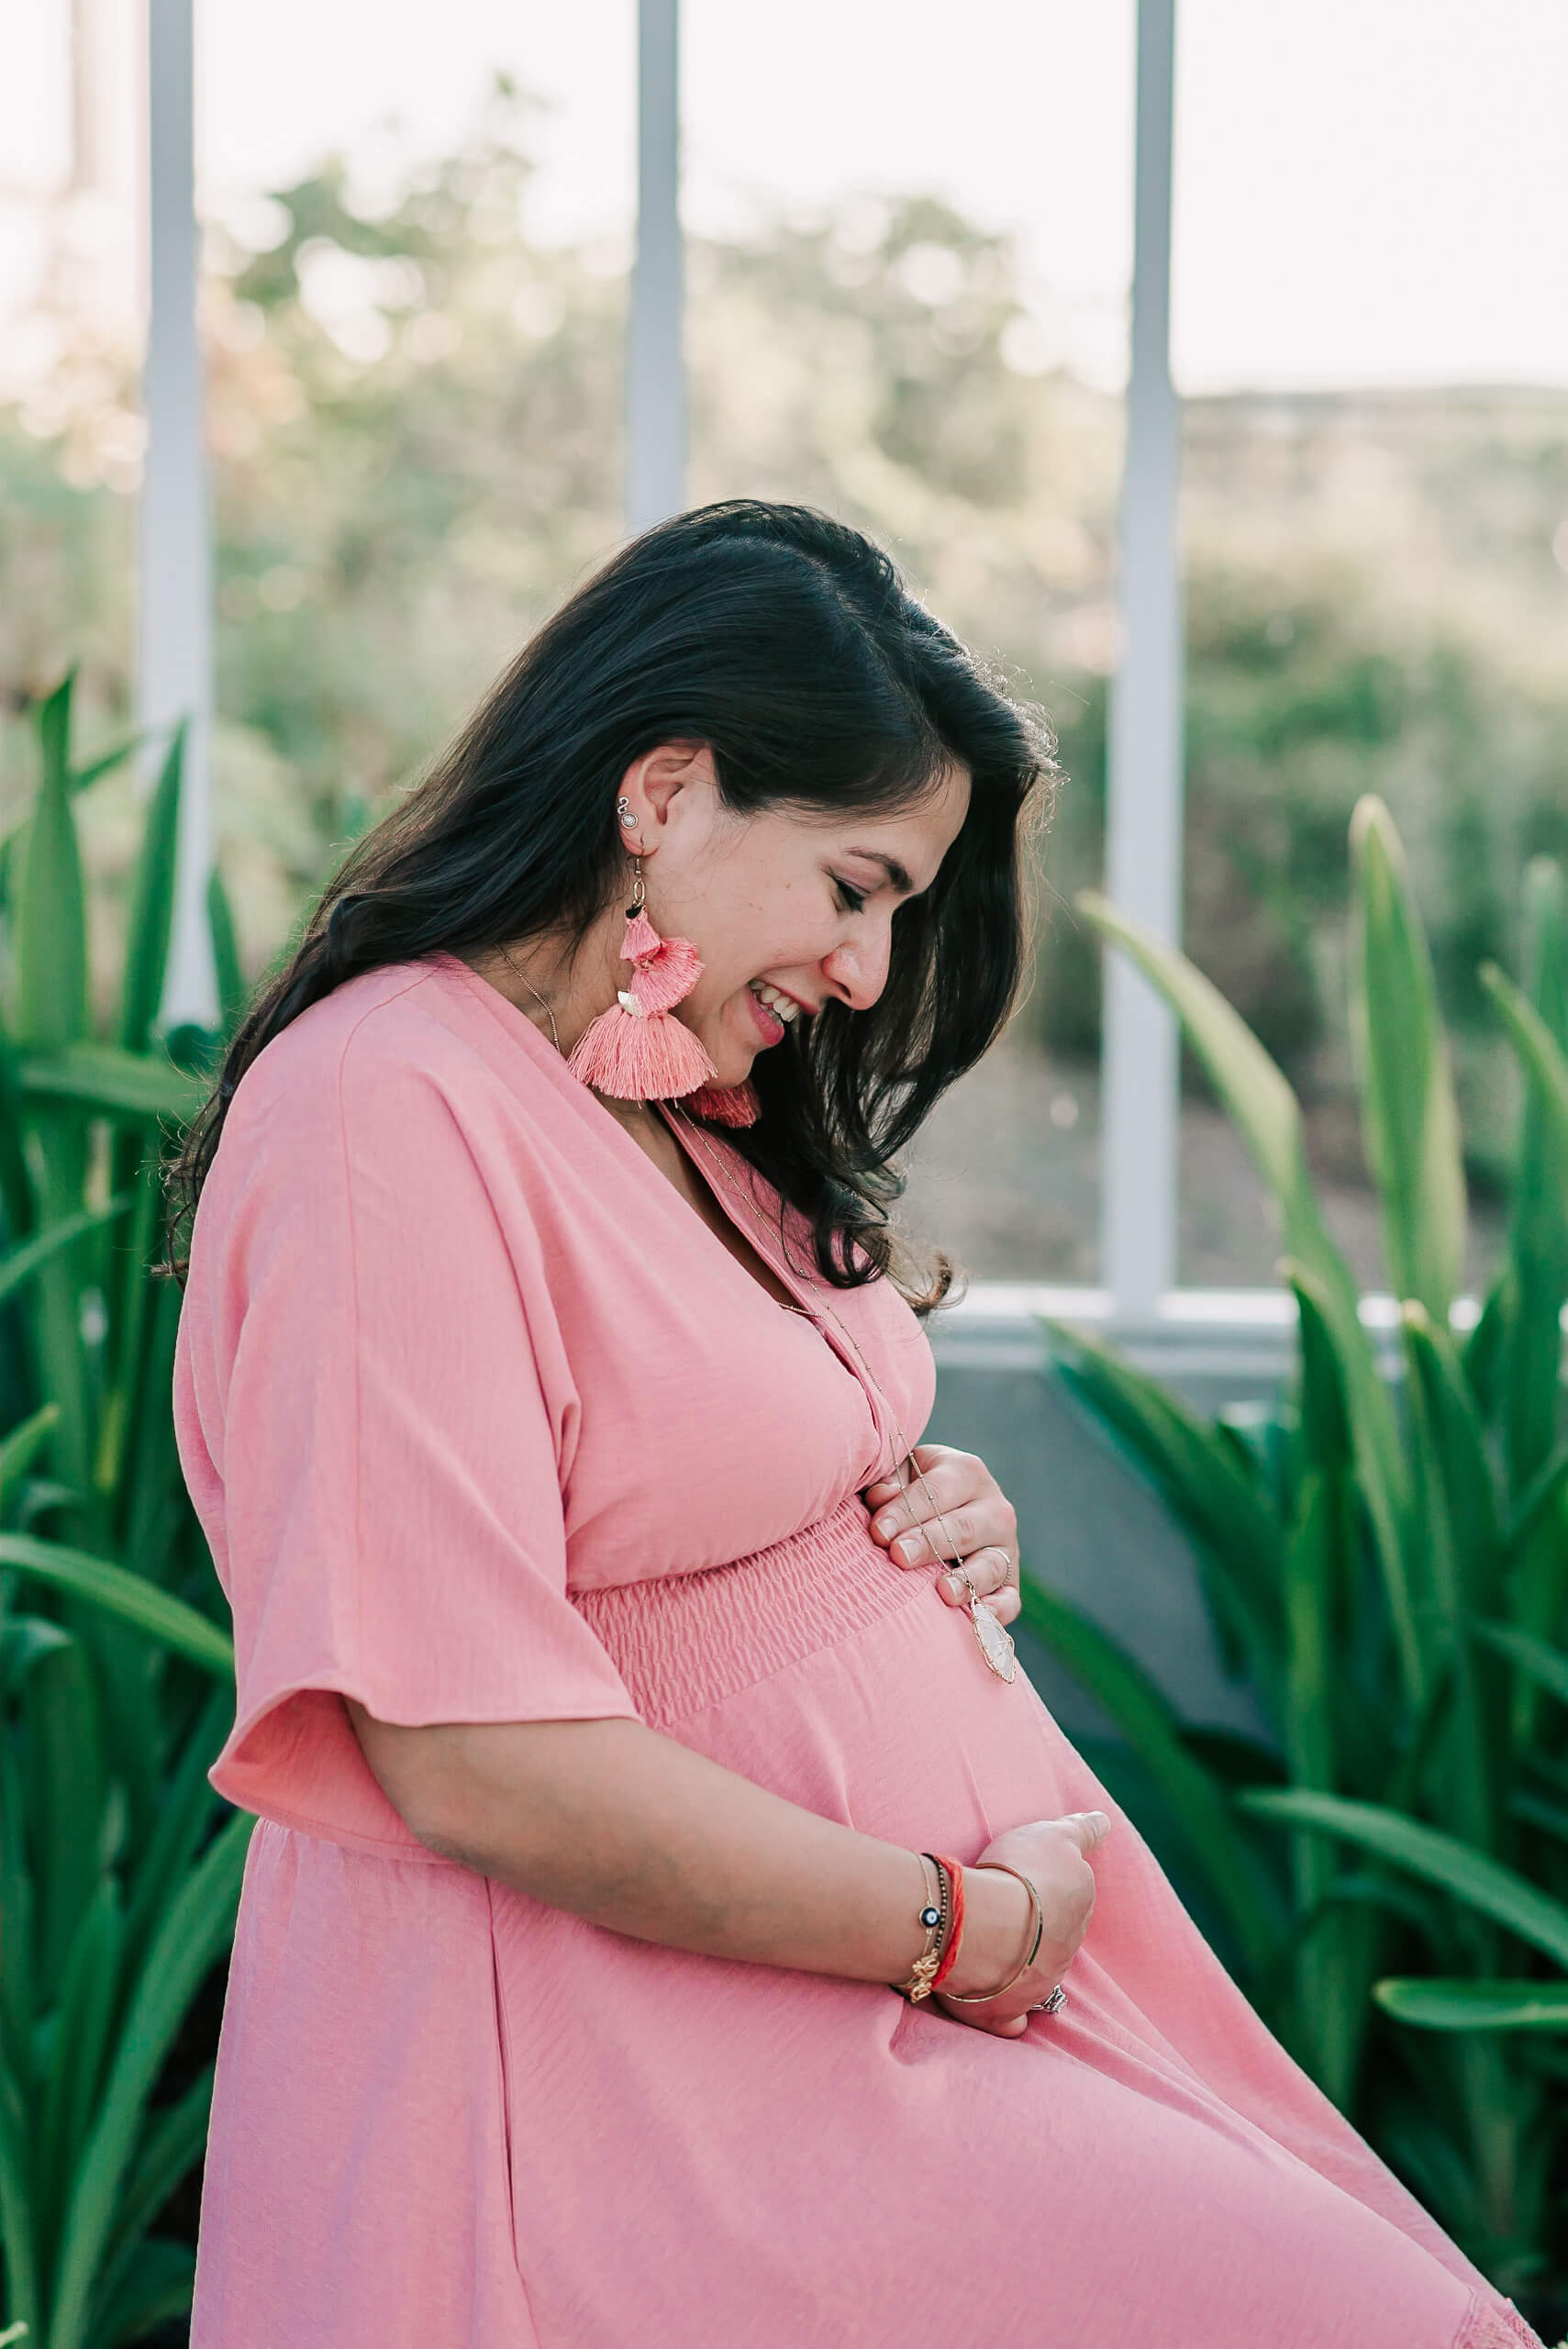 A mom to be sits on a stool in a greenhouse while holding and smiling down to her bump